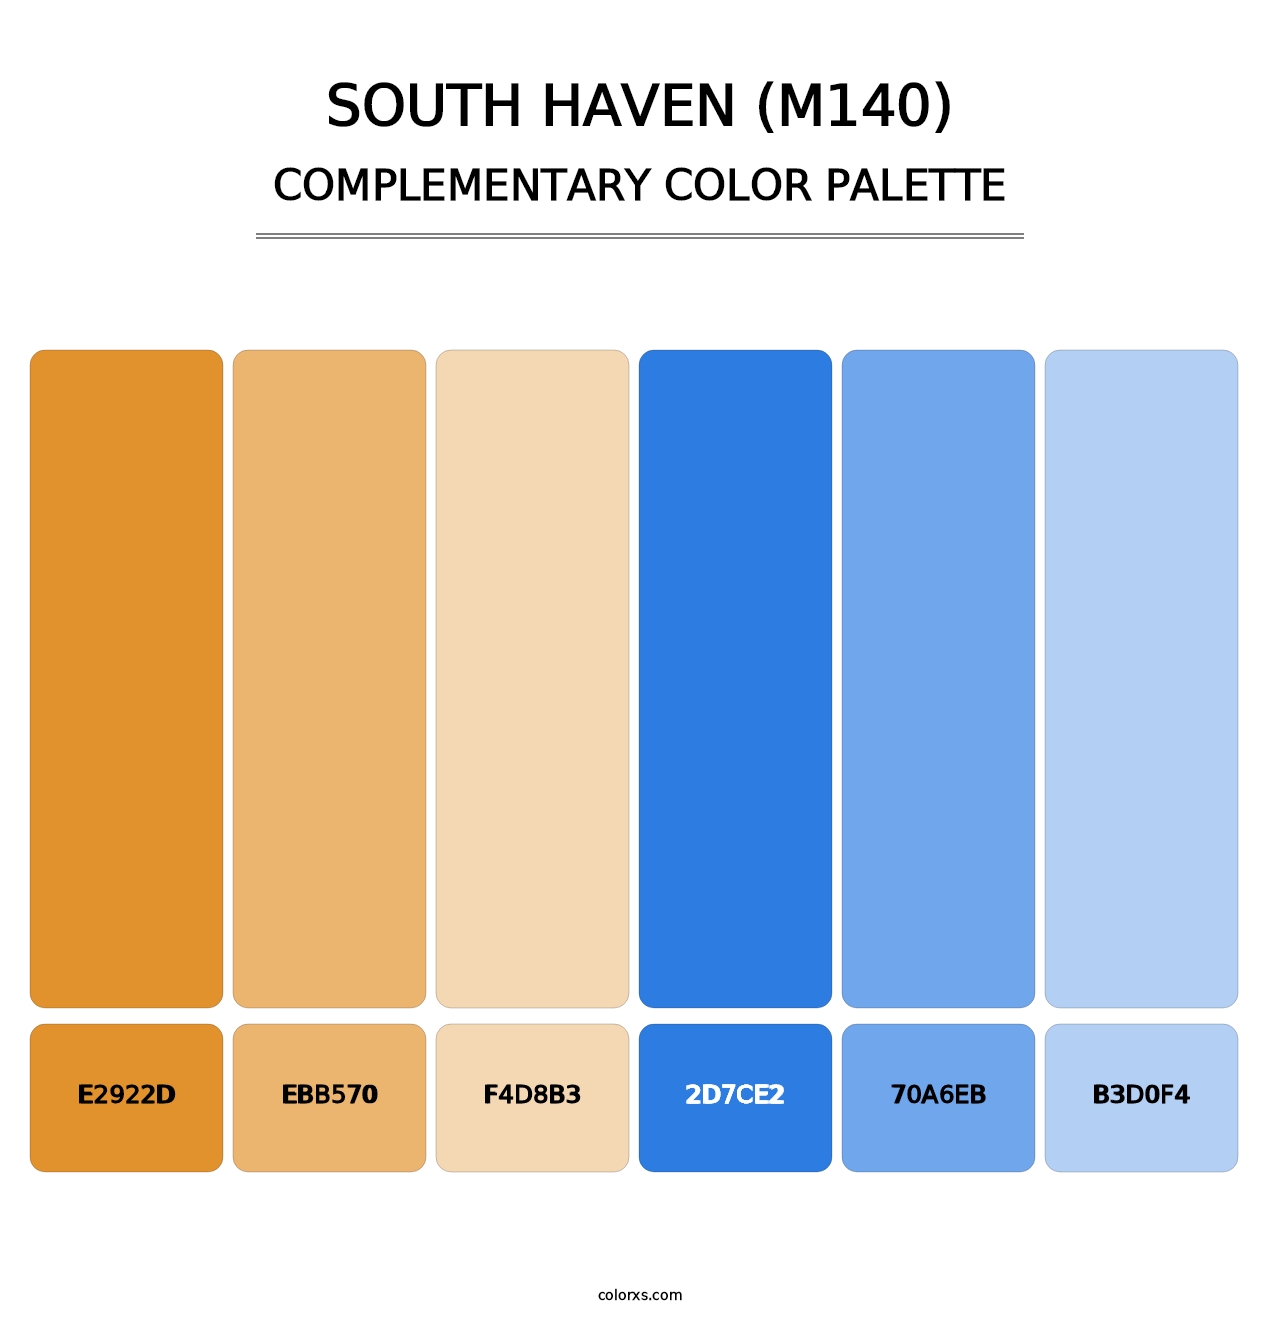 South Haven (M140) - Complementary Color Palette